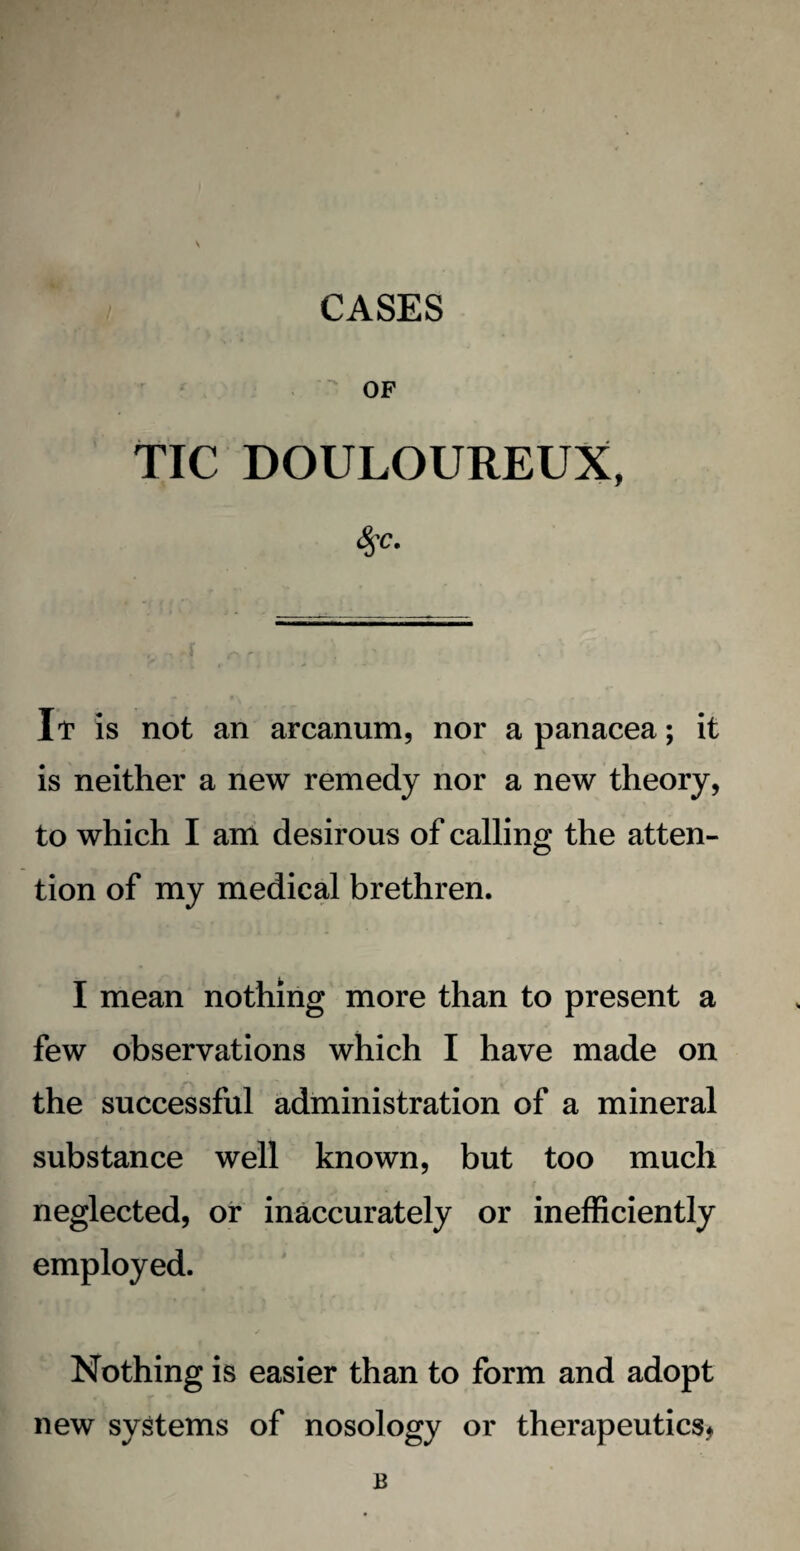 OF TIC DOULOUREUX, It is not an arcanum, nor a panacea; it is neither a new remedy nor a new theory, to which I am desirous of calling the atten¬ tion of my medical brethren. I mean nothing more than to present a few observations which I have made on the successful administration of a mineral substance well known, but too much neglected, or inaccurately or inefficiently employed. Nothing is easier than to form and adopt new systems of nosology or therapeutics* B